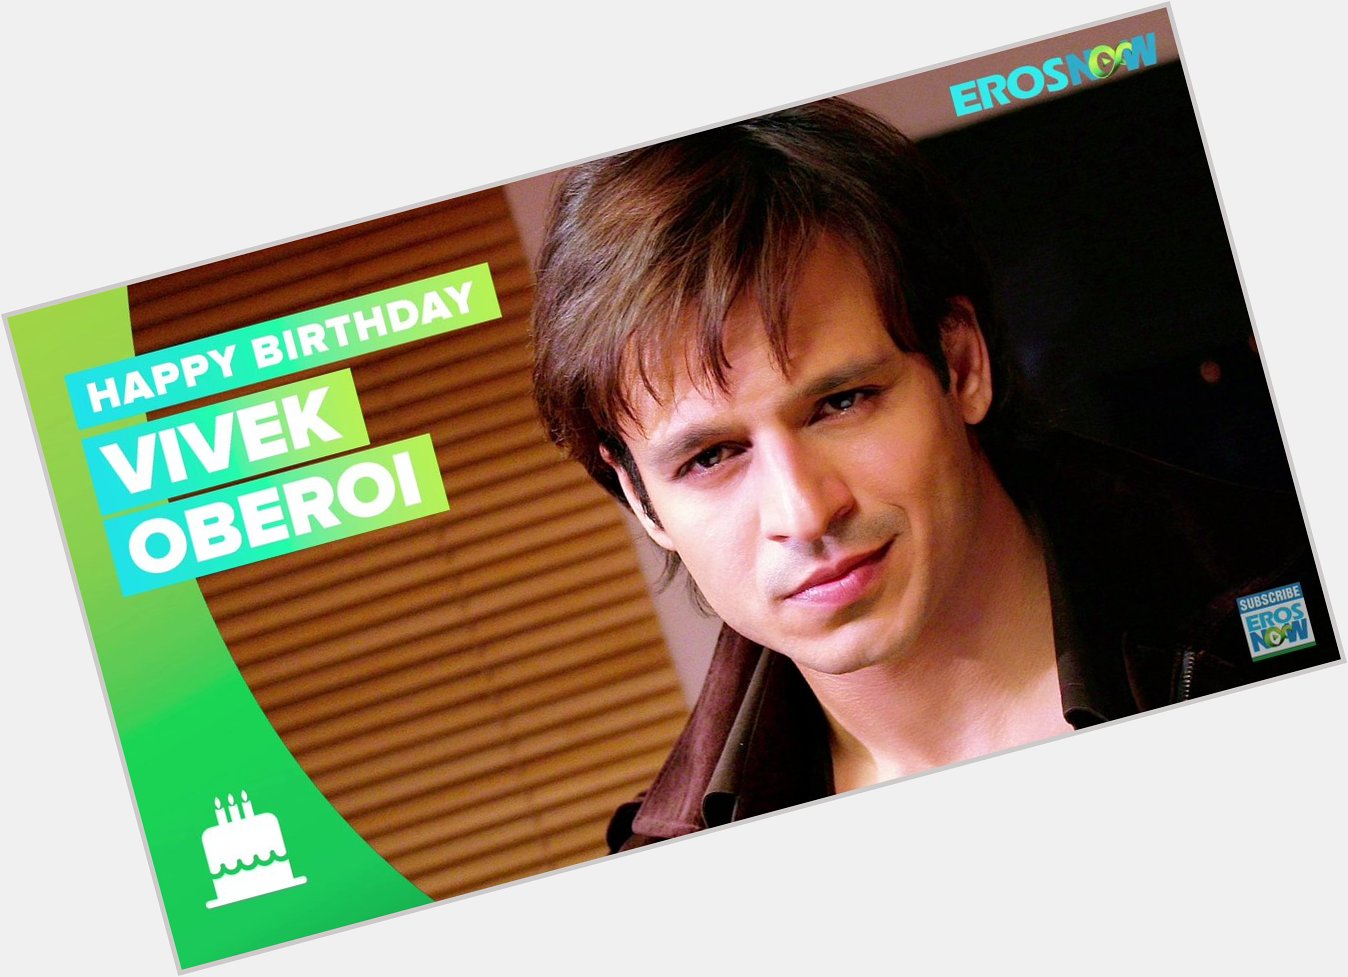  I wish for all of your wishes to come true. Happy birthday Vivek Oberoi sir!  